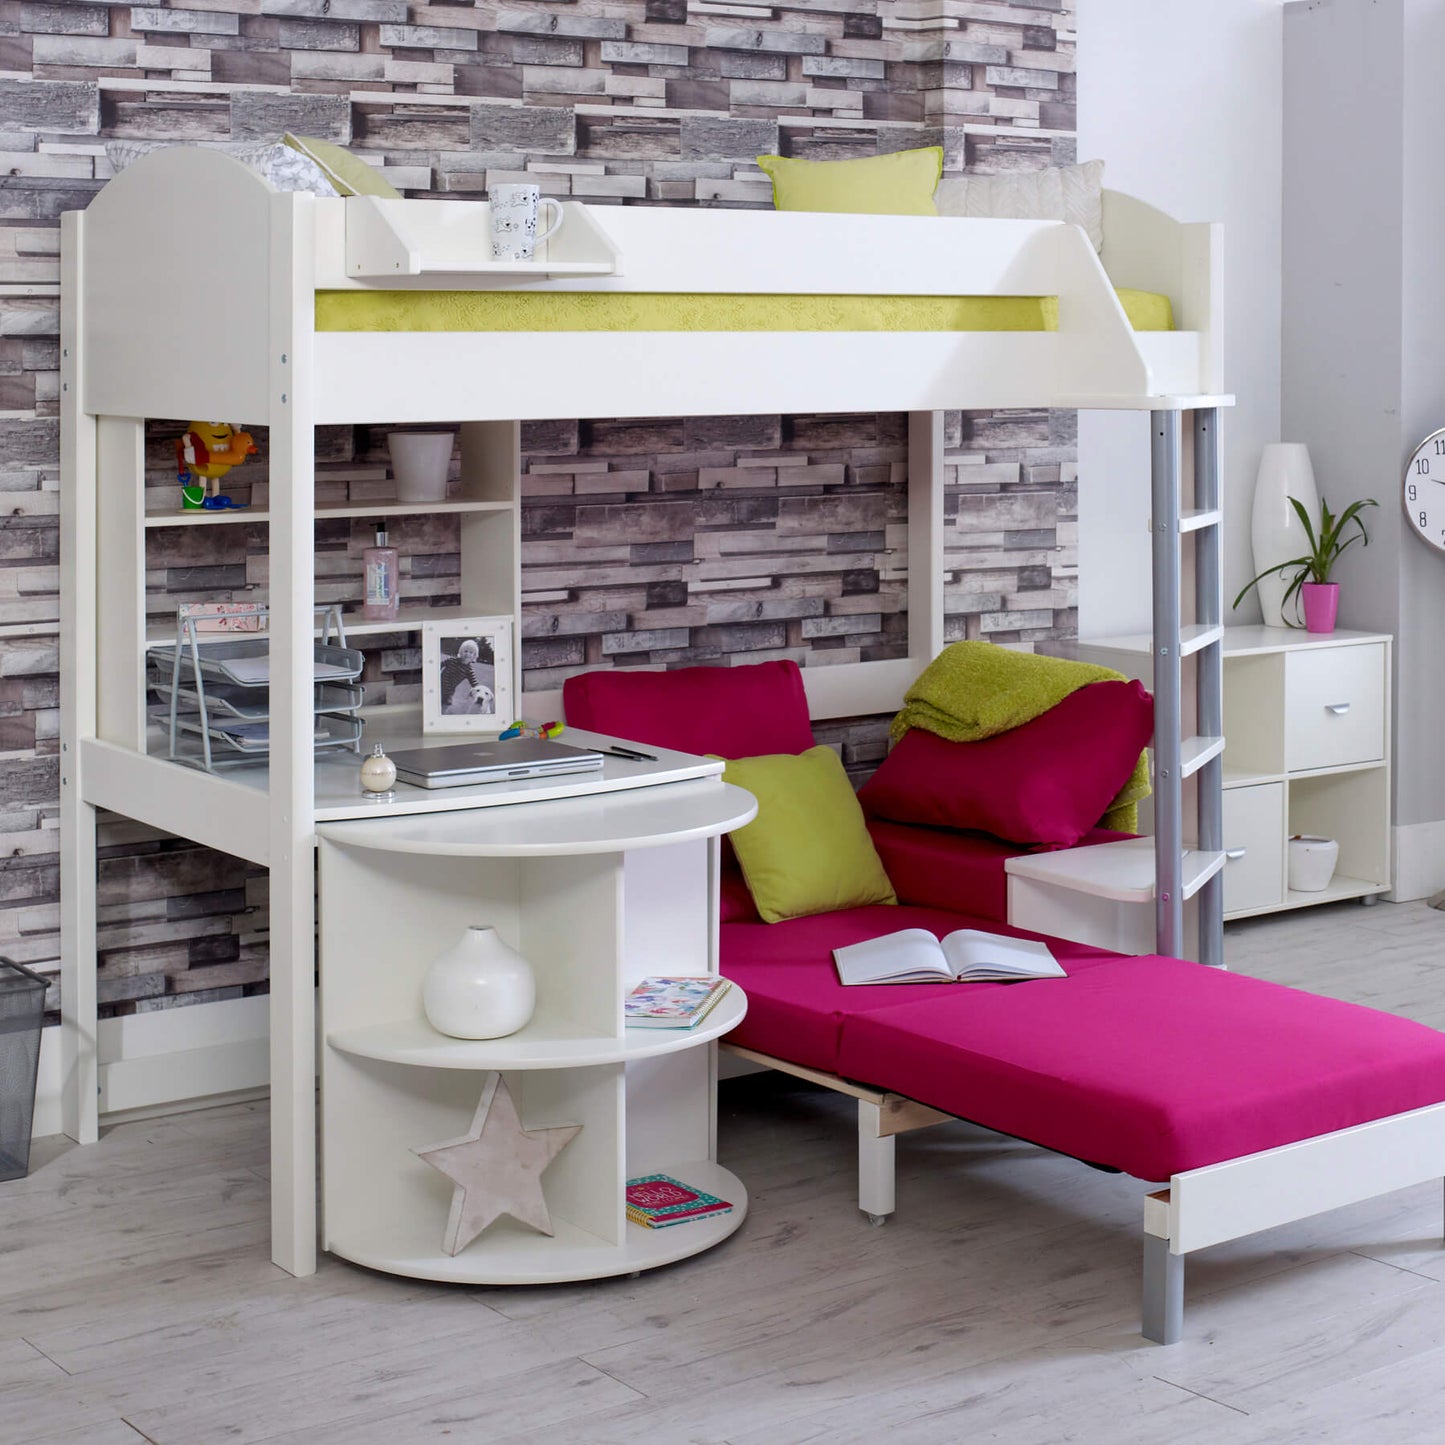 Noah & Eli Caleb High Sleeper Bed in White with Desk & Pink Chair Bed Extended + Shelves